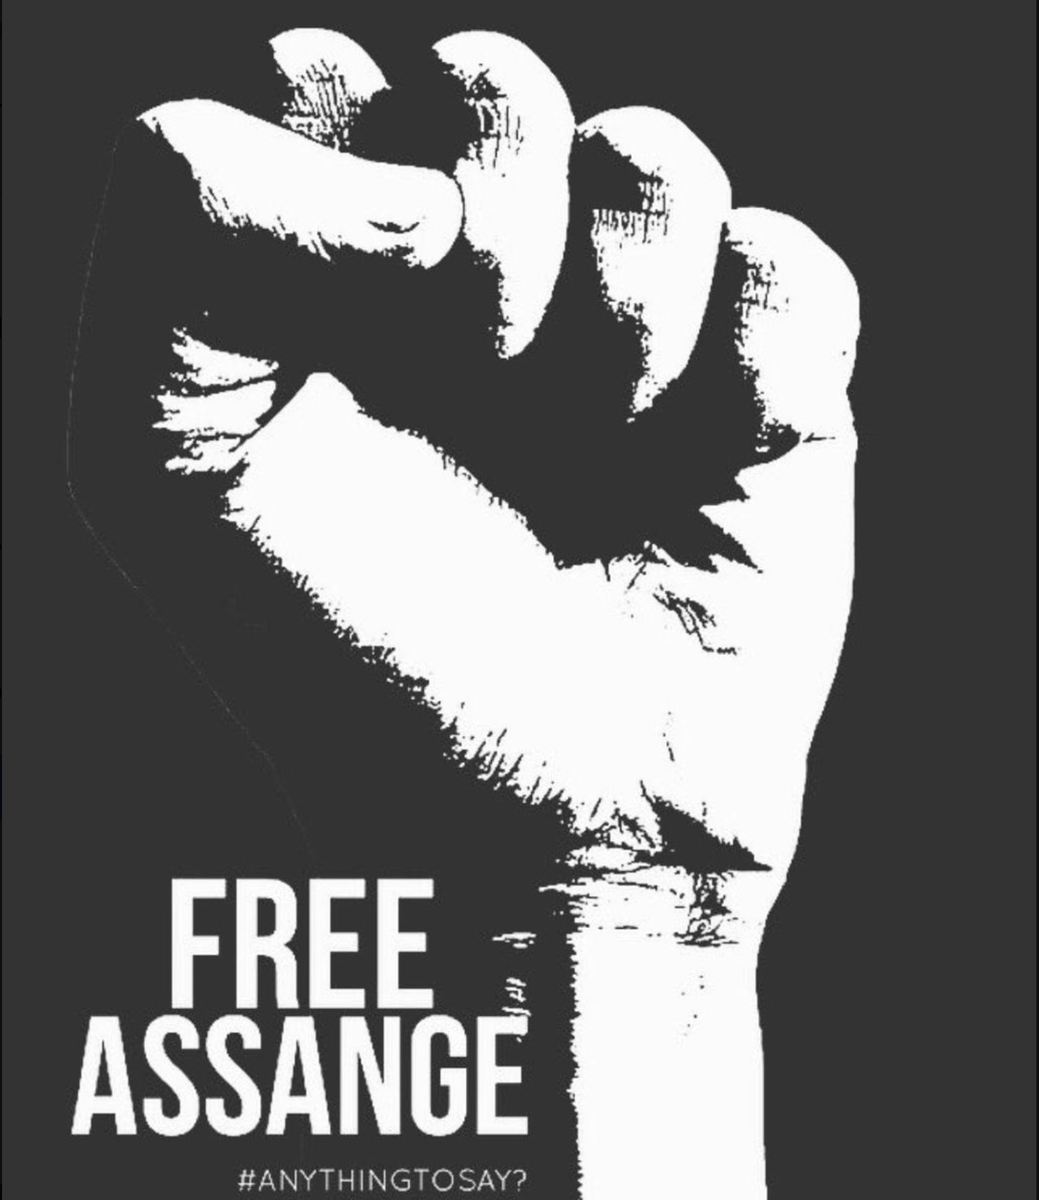 Join #TheResistance

Act Now! Free Assange
#FreeAssangeNOW